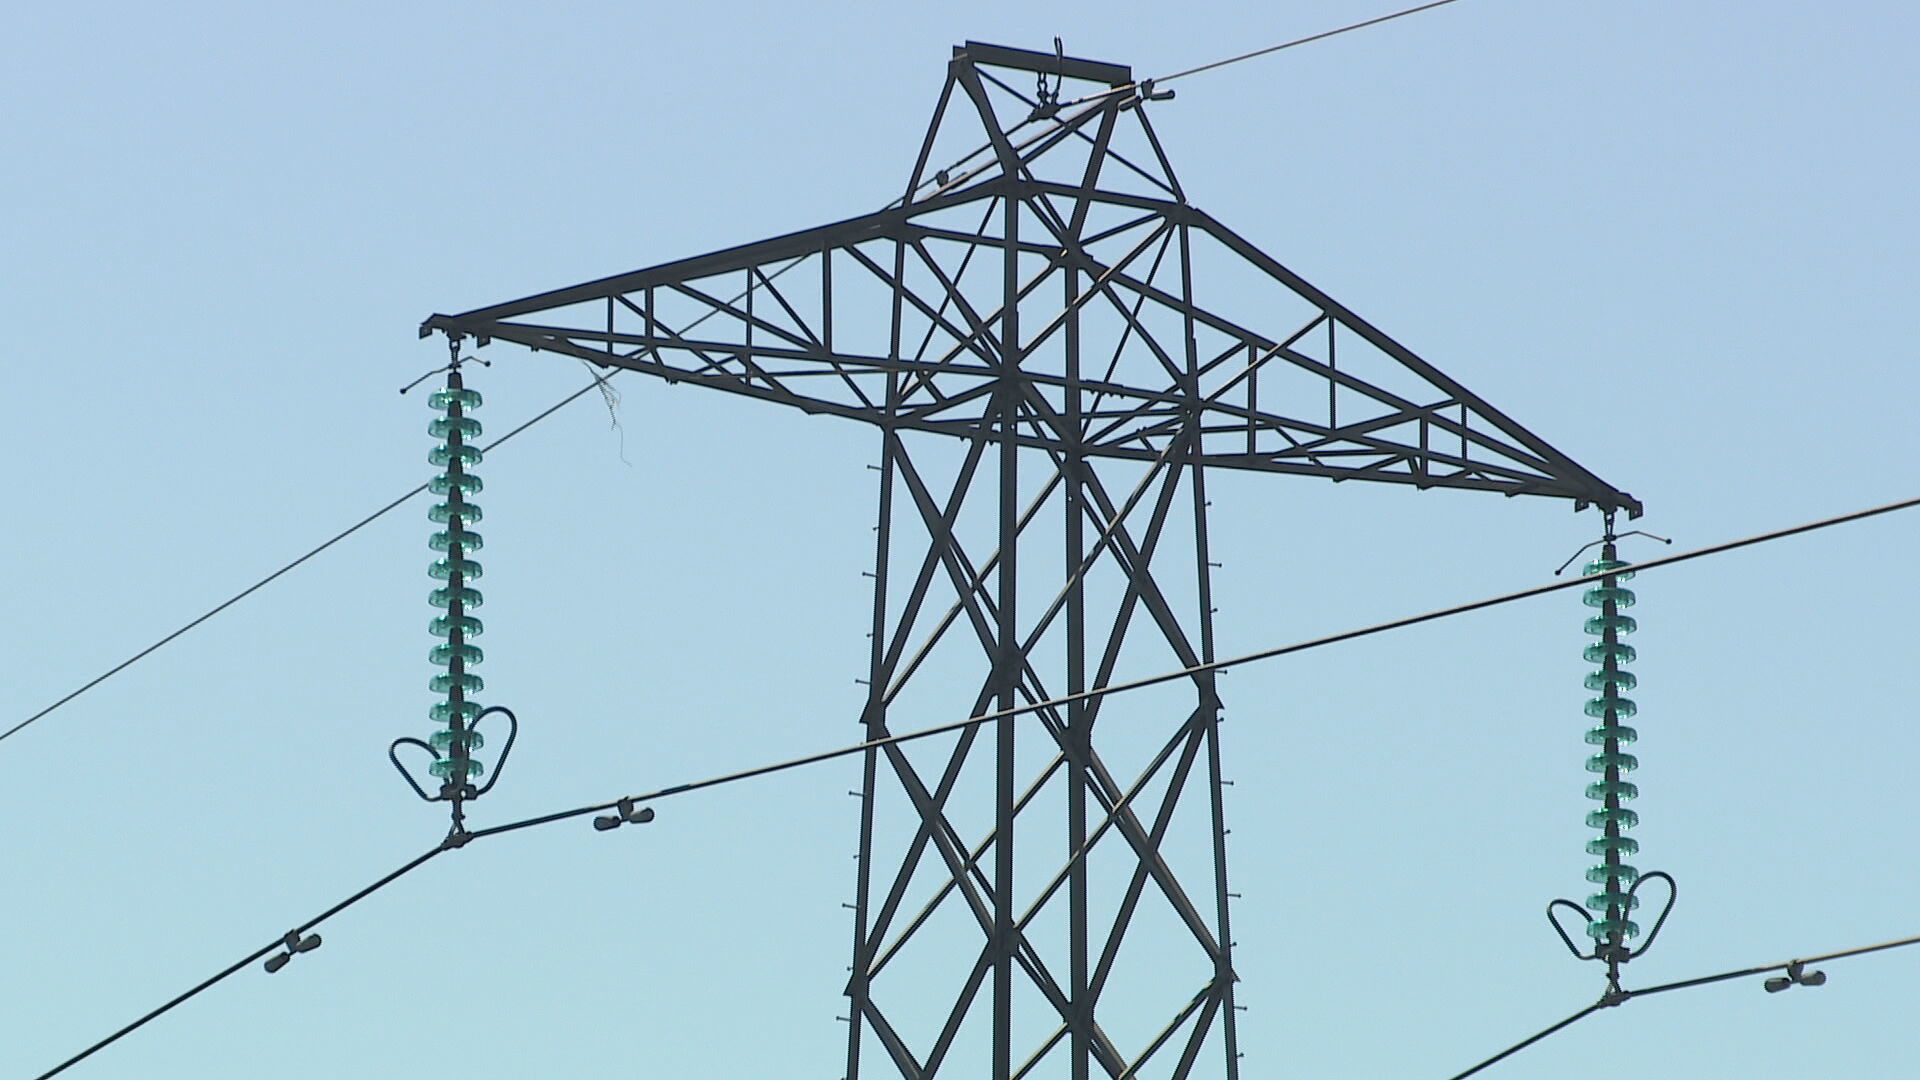 Councillors have opposed the pylon plans amid fears it could impact the environment and local communities